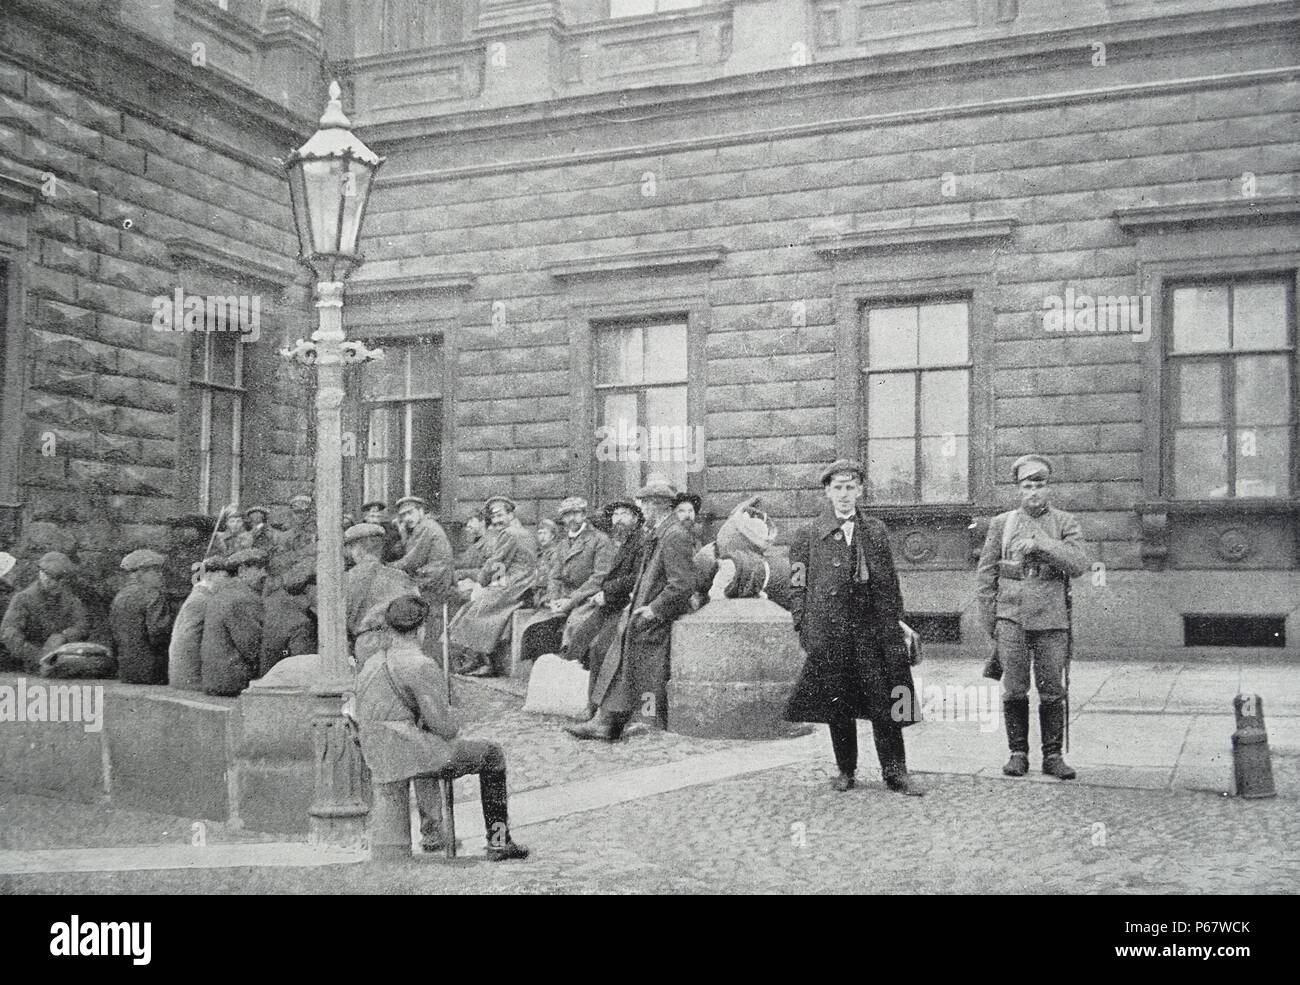 Group of hostages arrested by Red army soldiers in front of the Marie Palace in St Petersburg, Russia during the Russian Revolution September 1918 Stock Photo